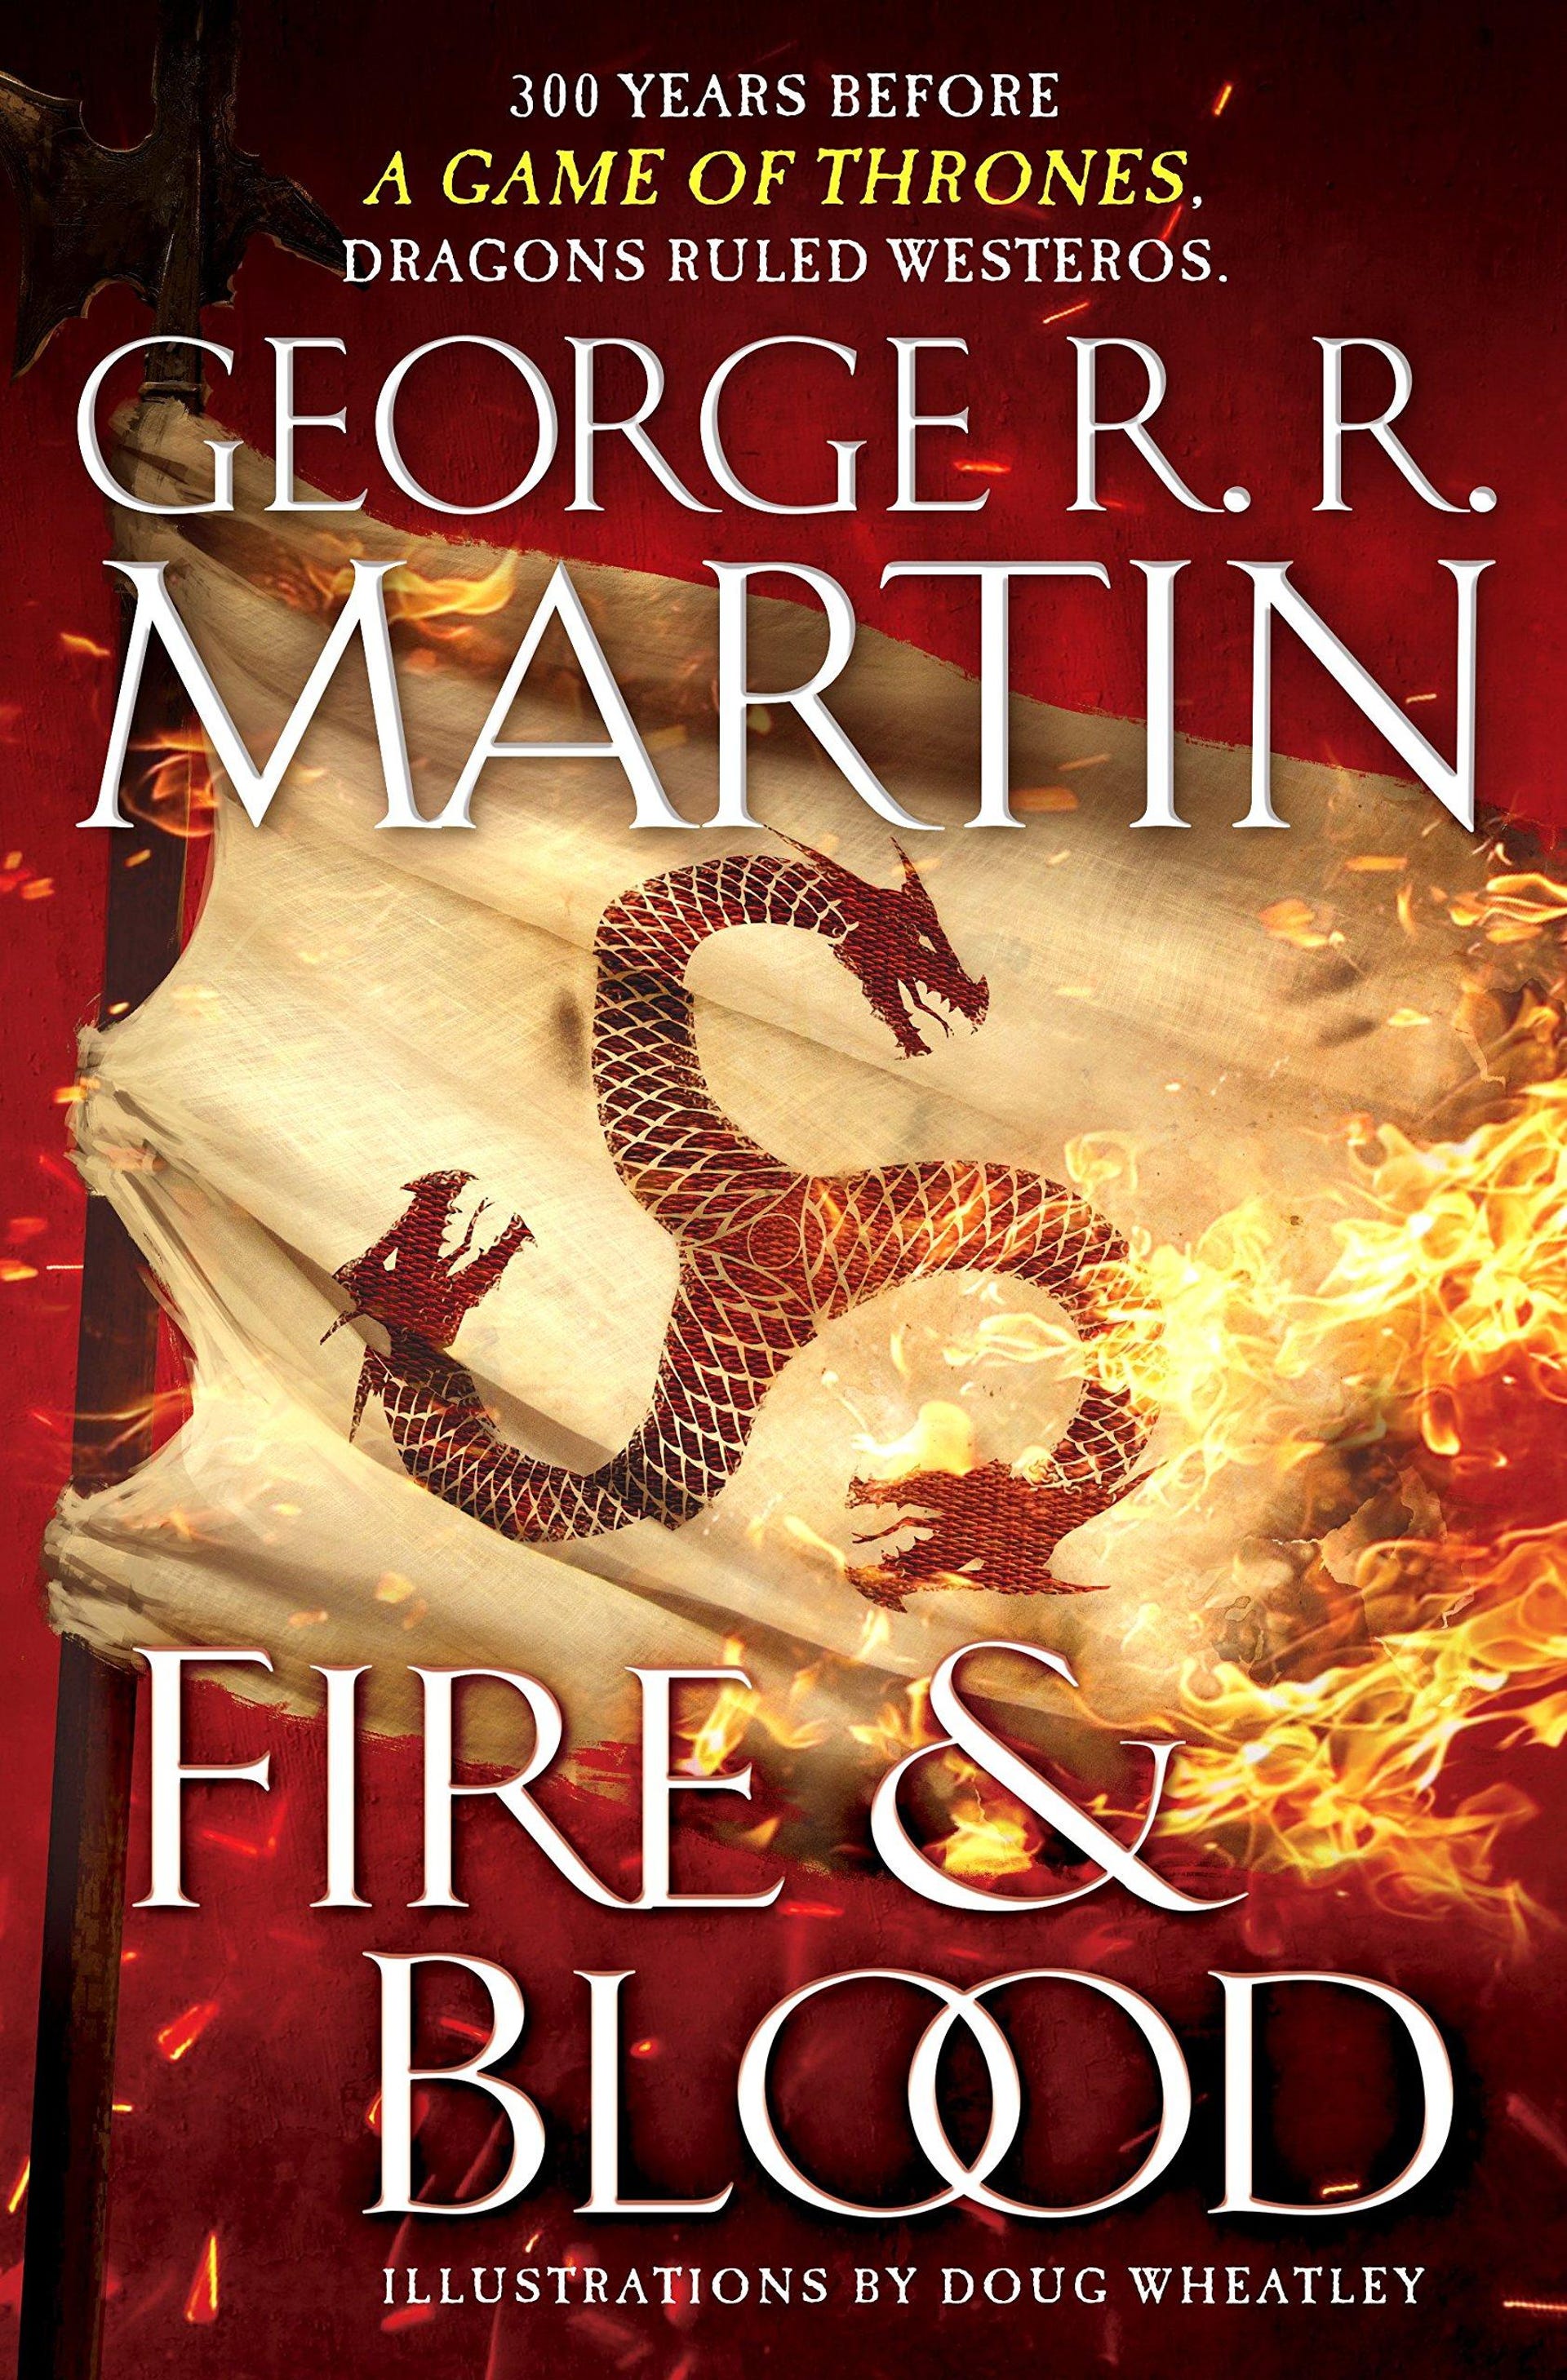 fire-and-blood-game-of-thrones-book-cover